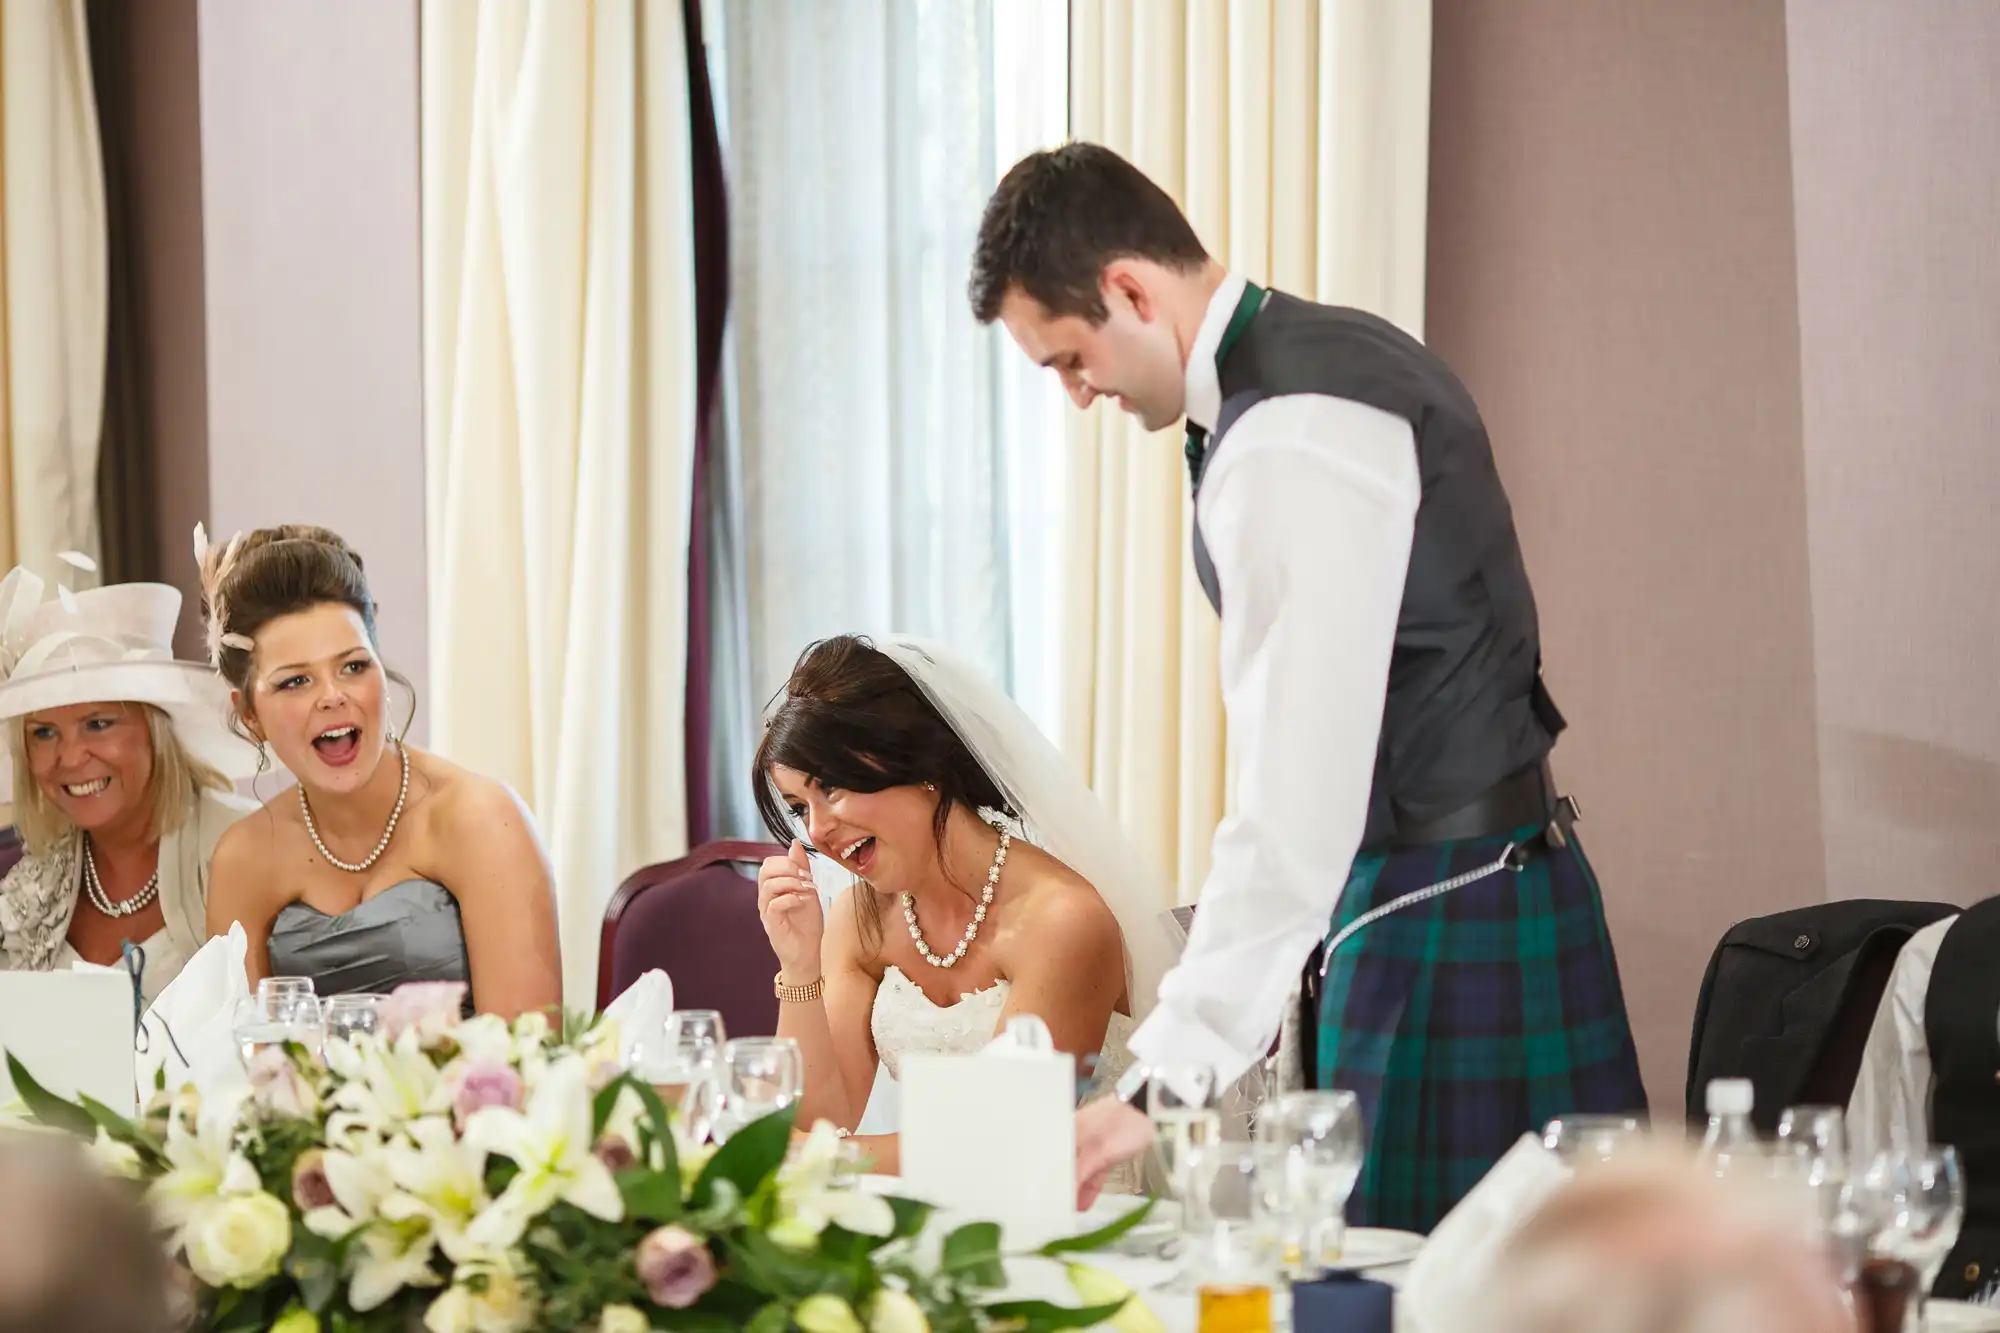 A bride and groom at a wedding reception table, laughing with guests, the groom wearing a kilt.